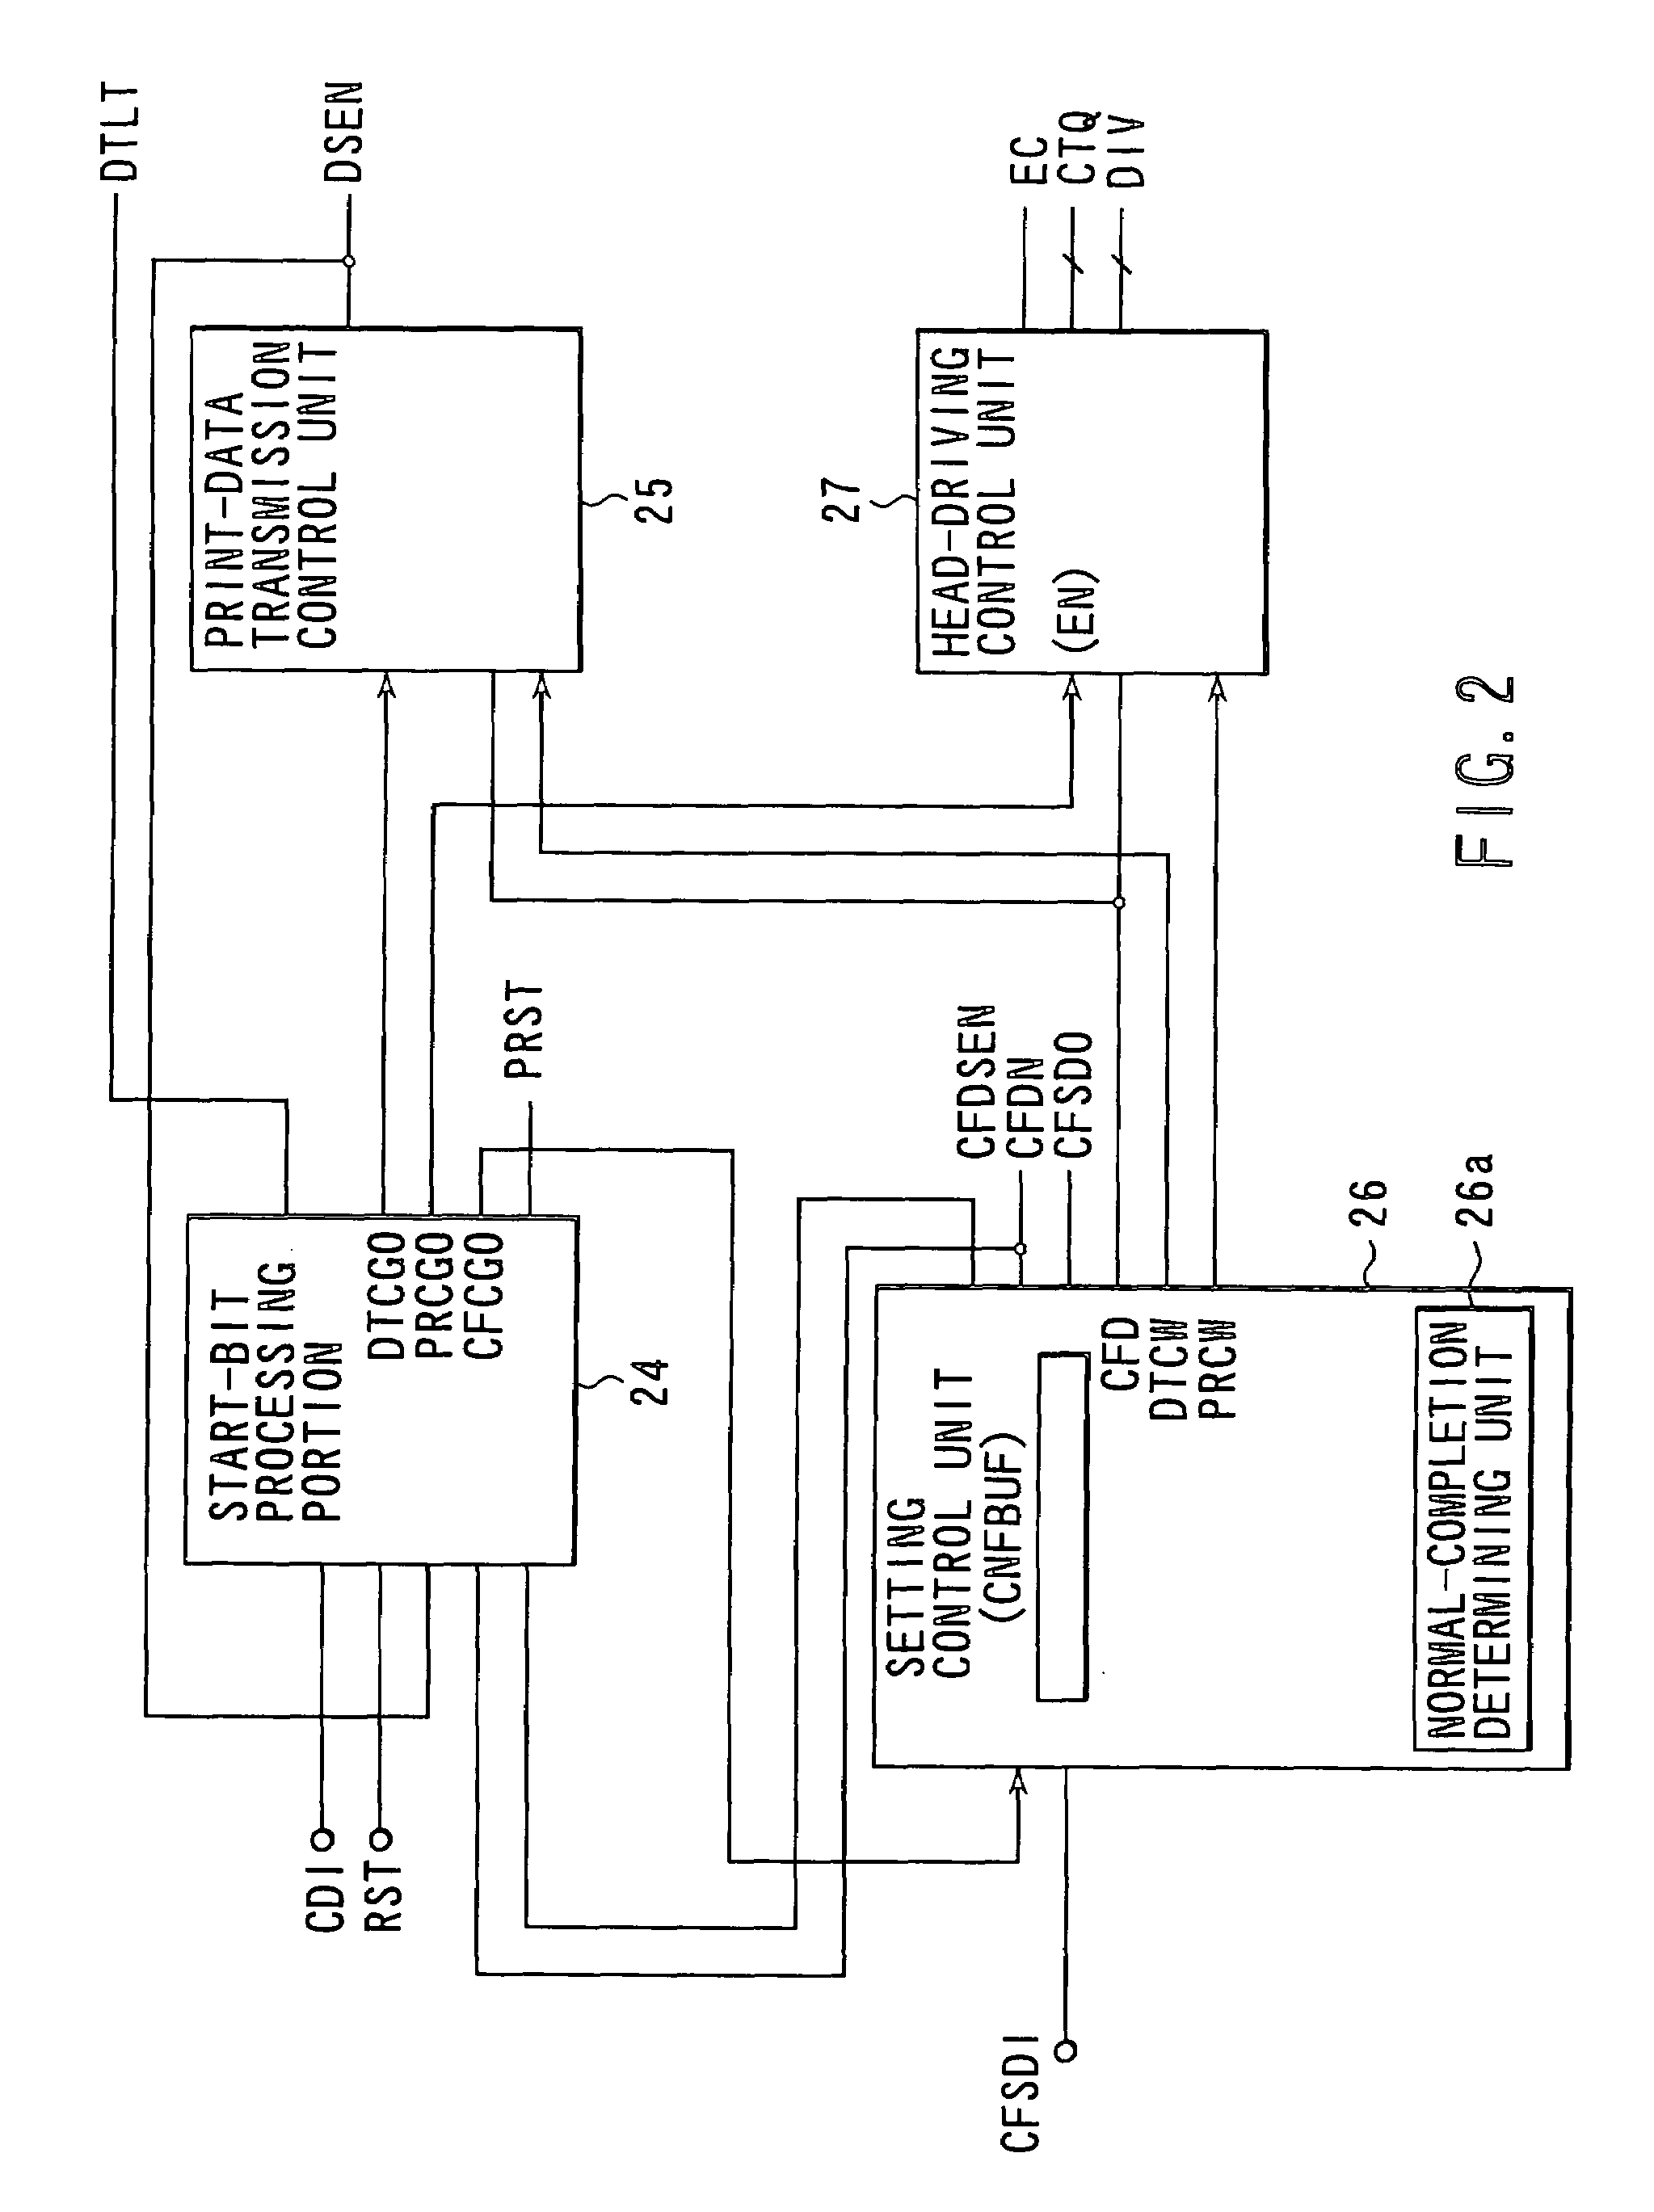 Driving control apparatus and driving control method